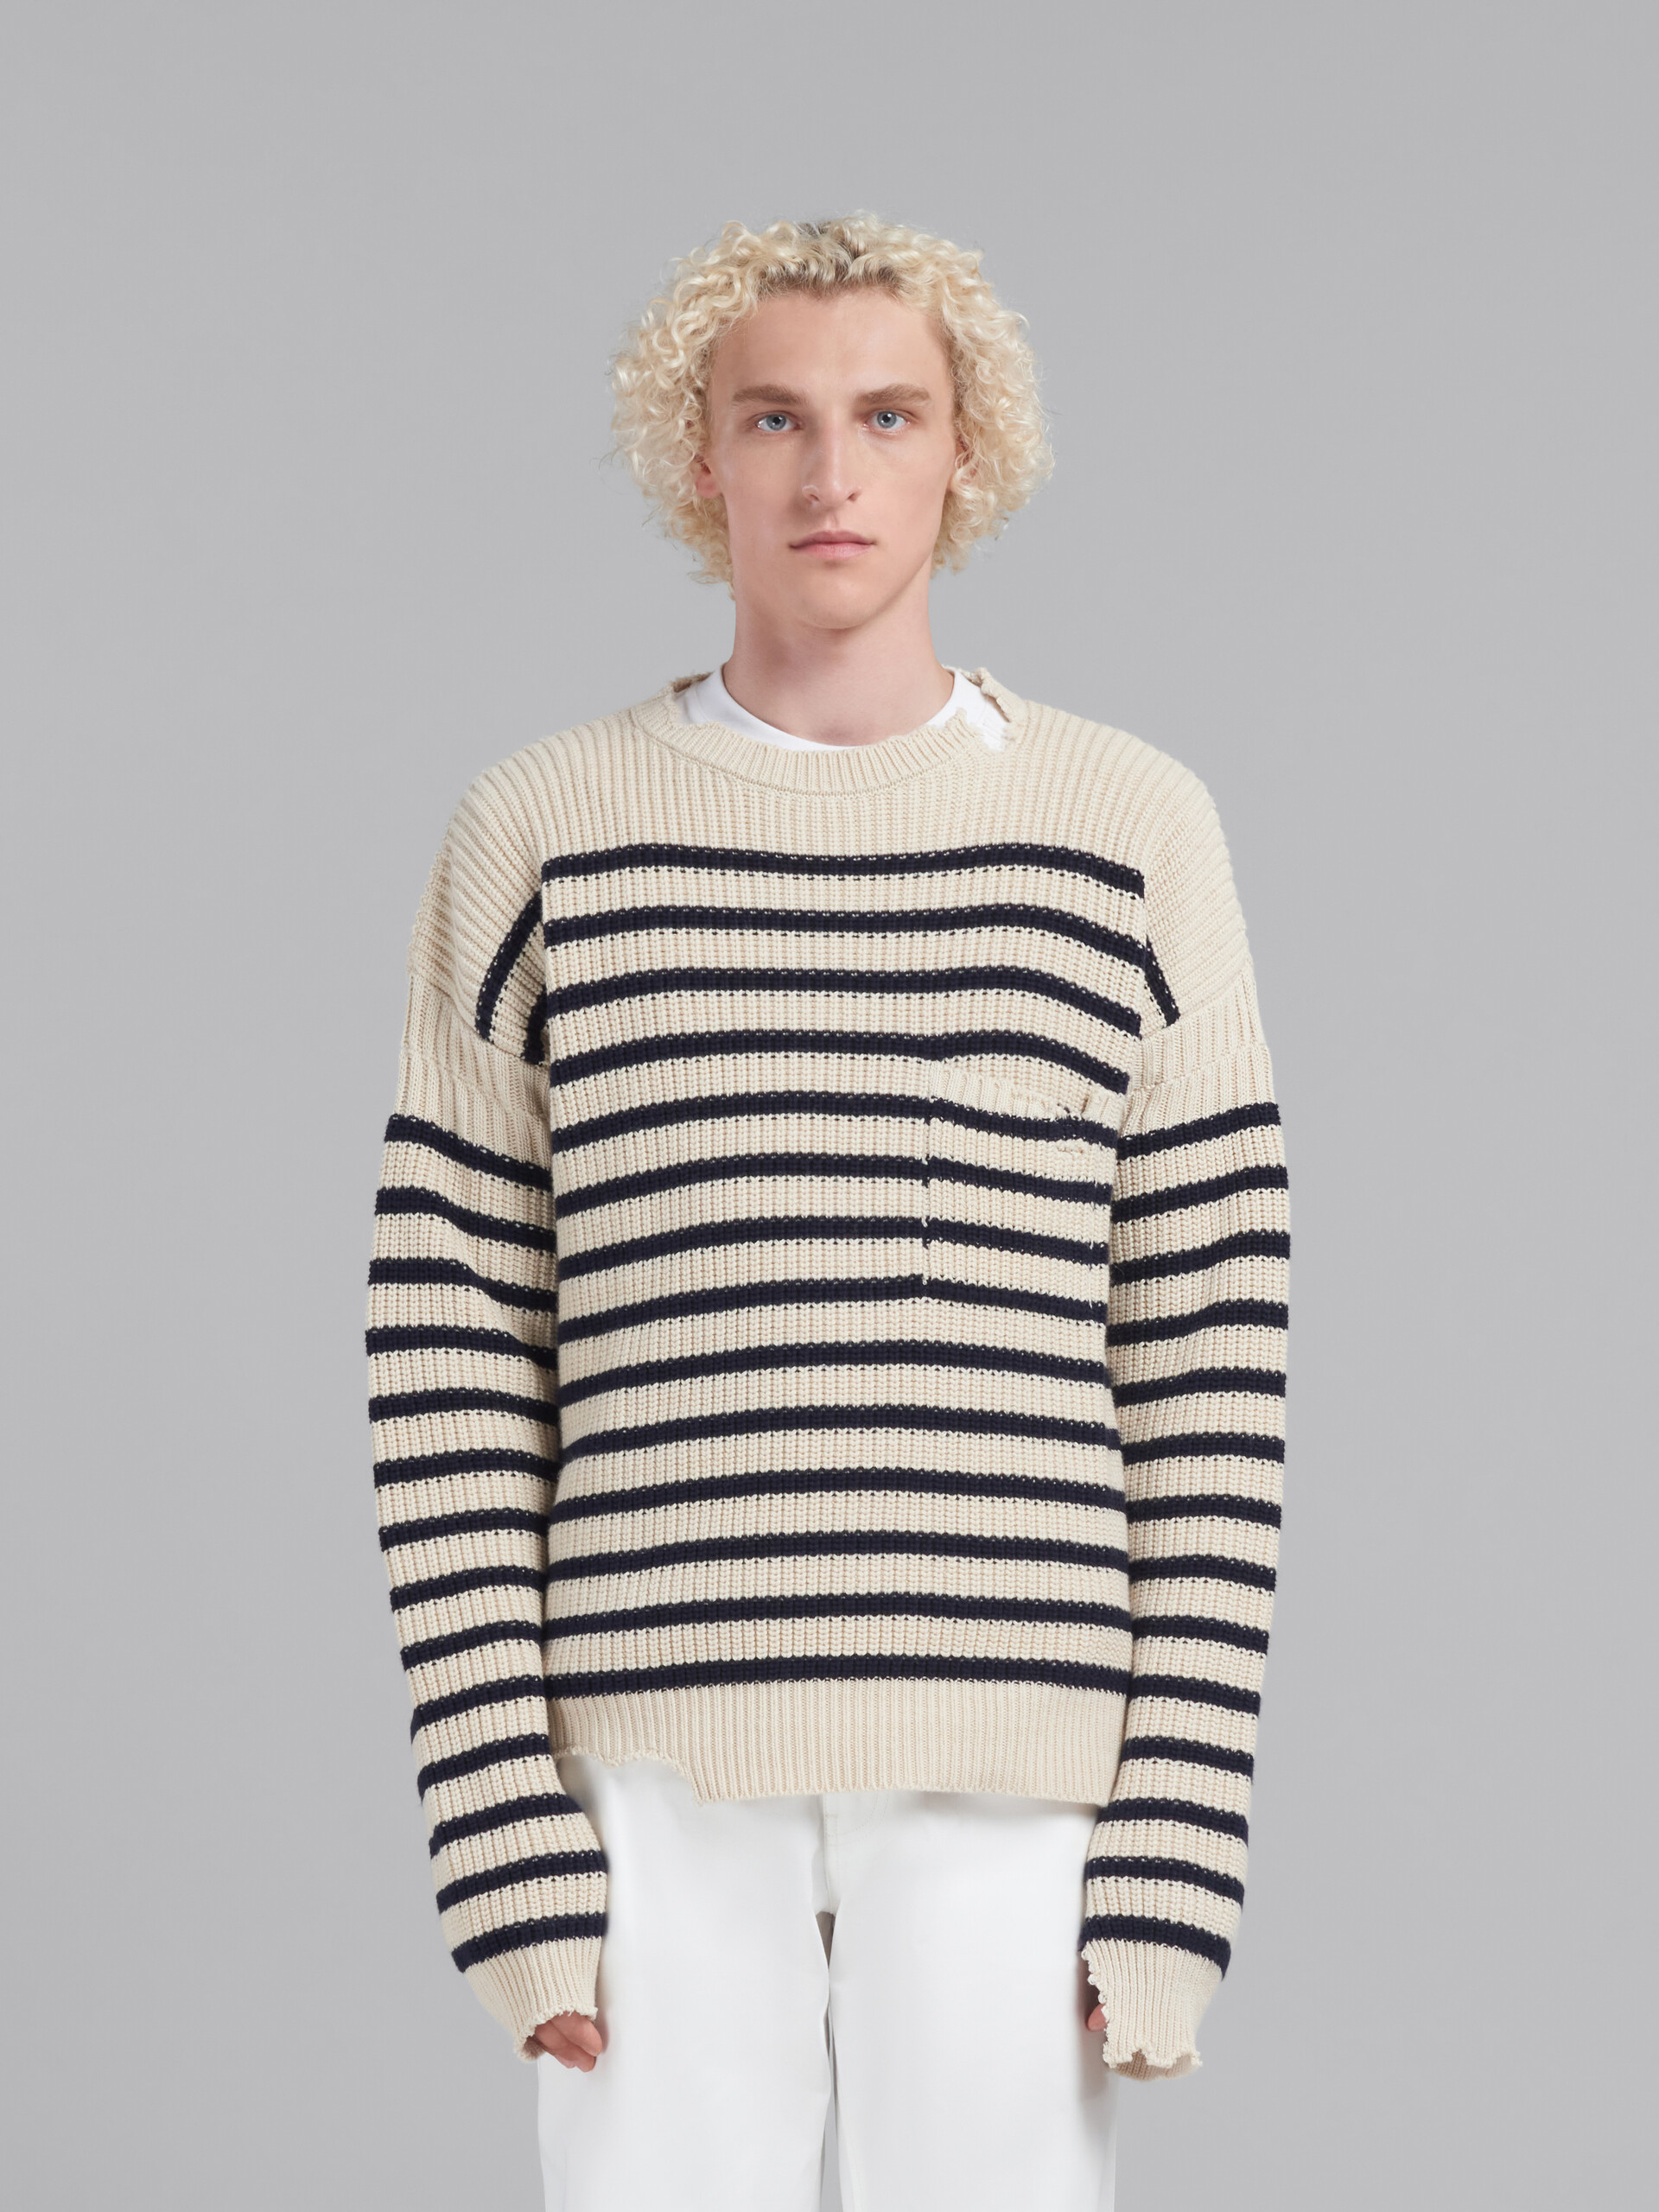 White wool and cotton striped fisherman jumper - Pullovers - Image 2